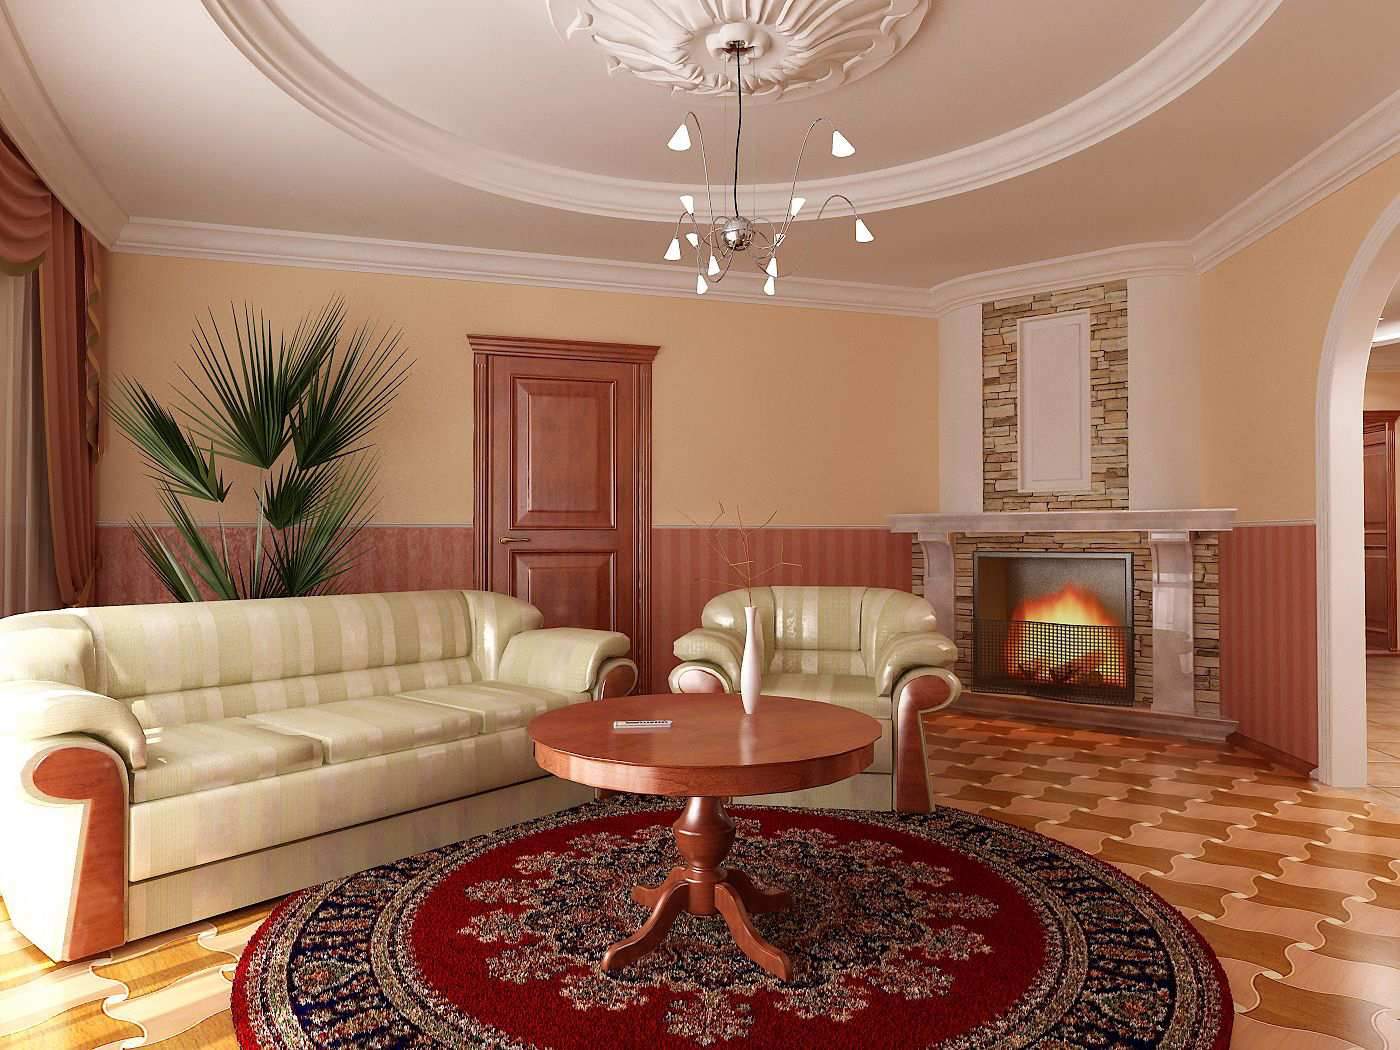 Living Room With Marvelous Living Room Paint Ideas With Fireplace Completed With Pedestal Round Table Wooden Made On Circle Rug Furnished With Sofa And Chairs Living Room Modern Living Room Paint Ideas With Color Combination